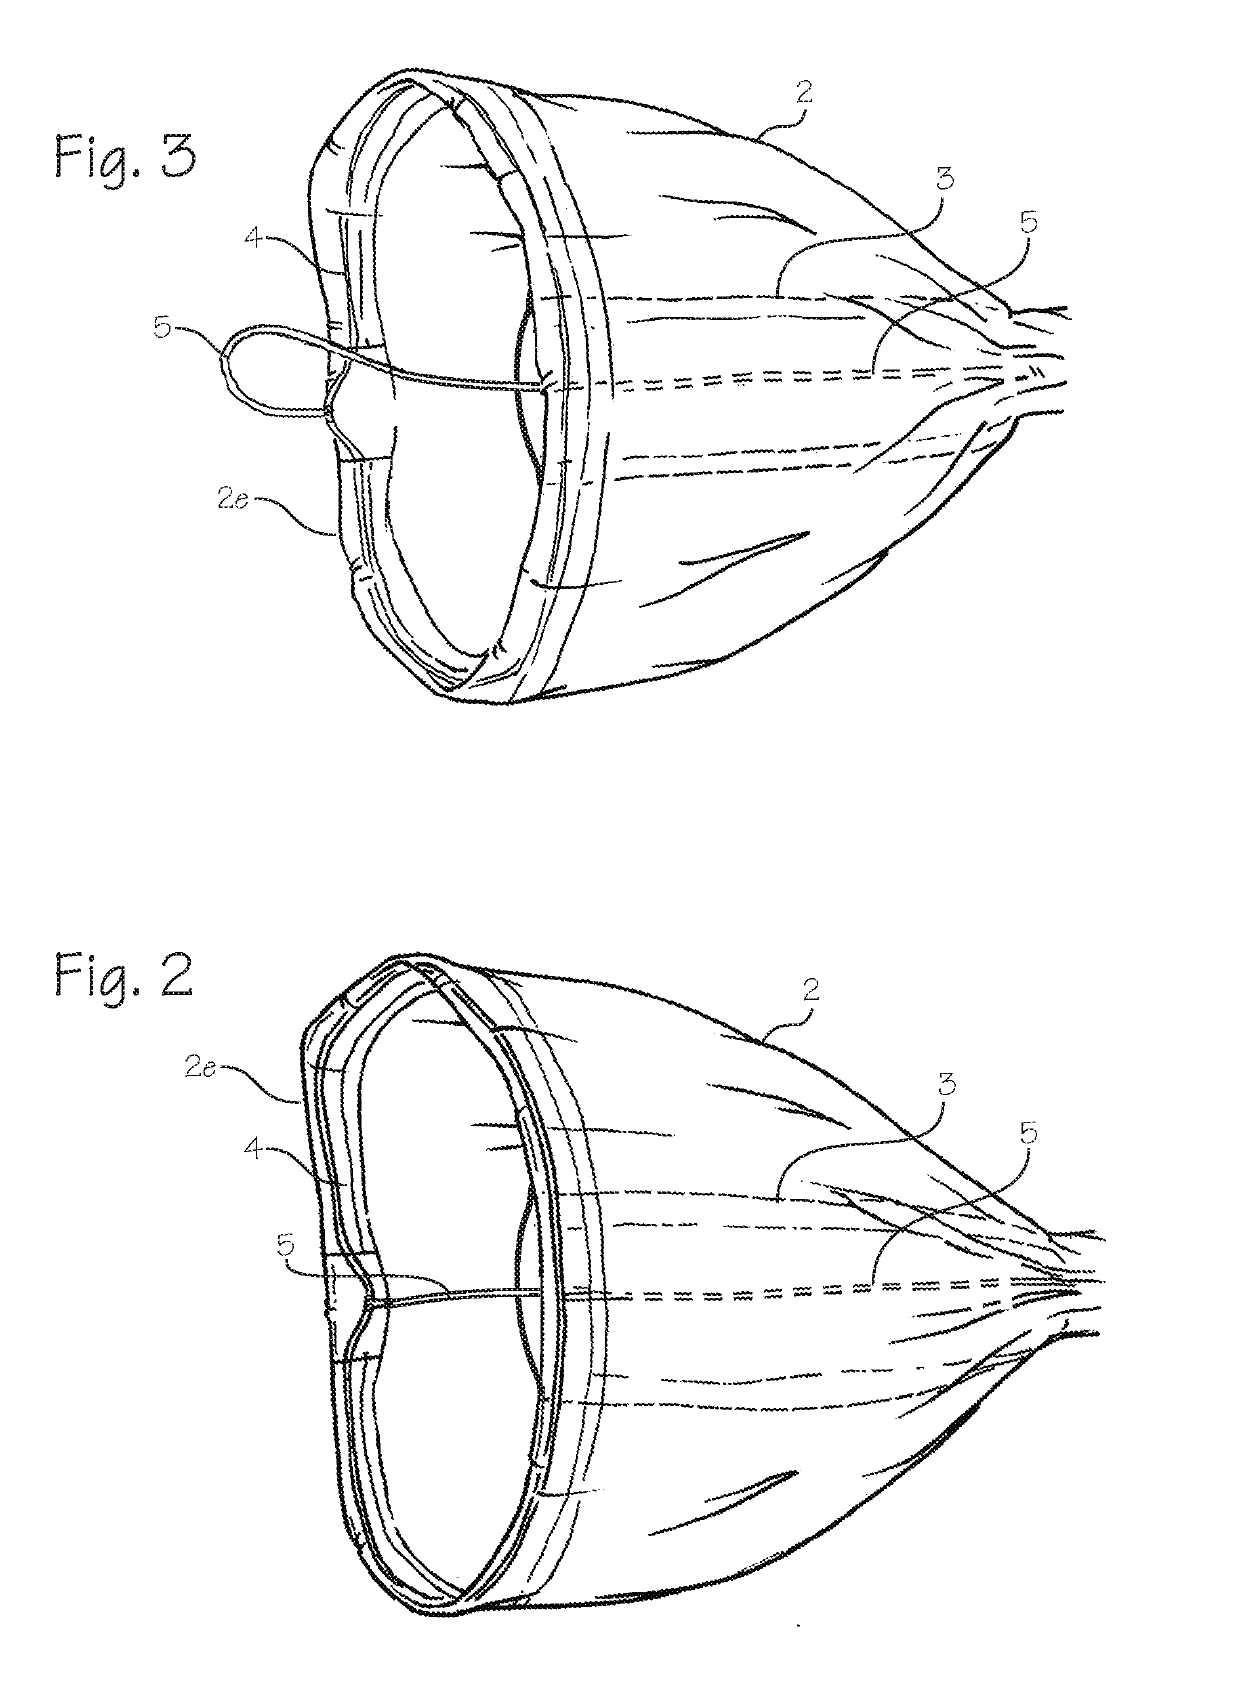 Specimen retrieval system for use in endoscopic surgery